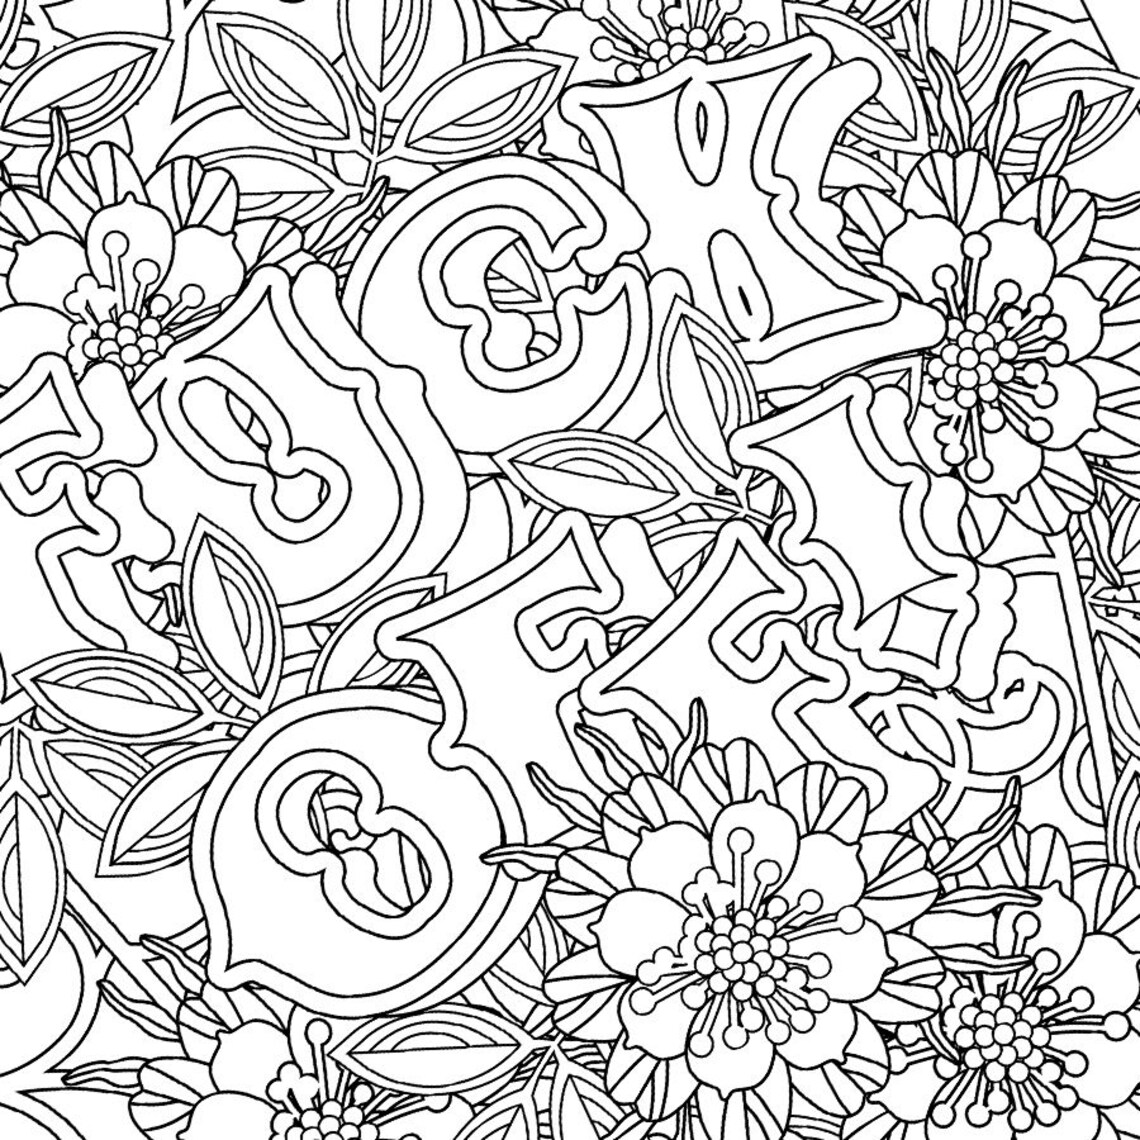 1 Adult coloring page / Fuck off instant download printable | Etsy